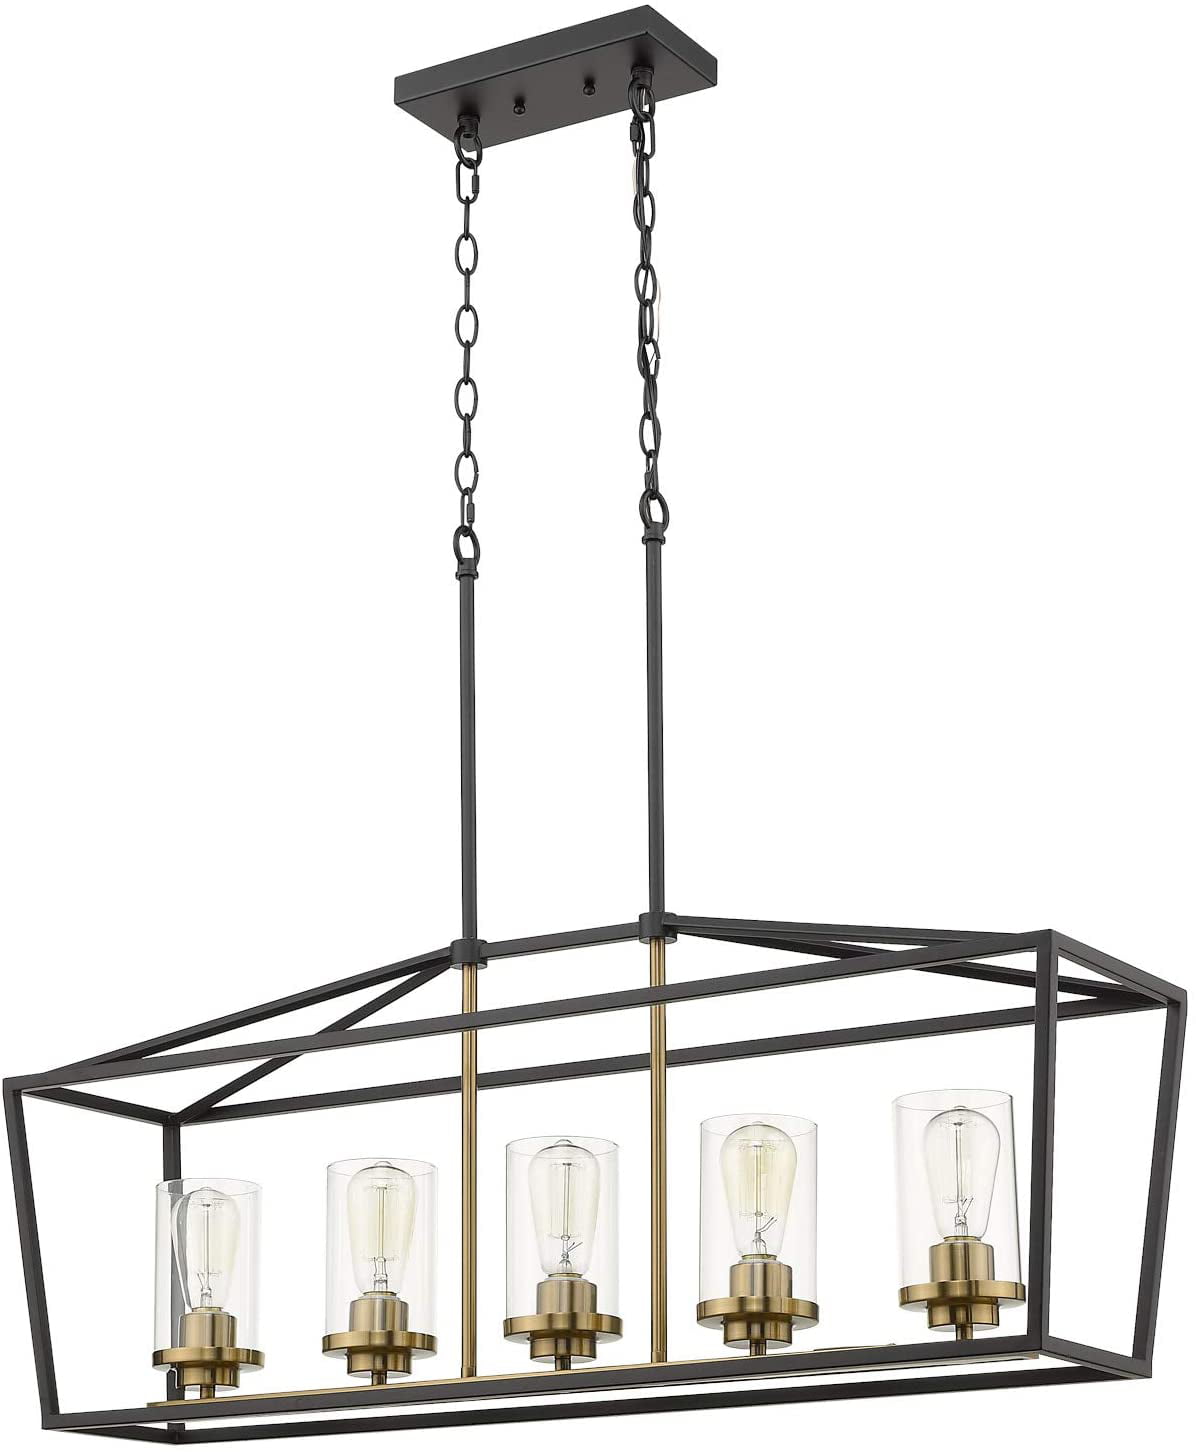 Oil Rubbed Bronze Finish with Clear Glass Shade Emliviar 5-Light Kitchen Island Lighting 2074LP ORB Modern Domestic Linear Pendant Light Fixture